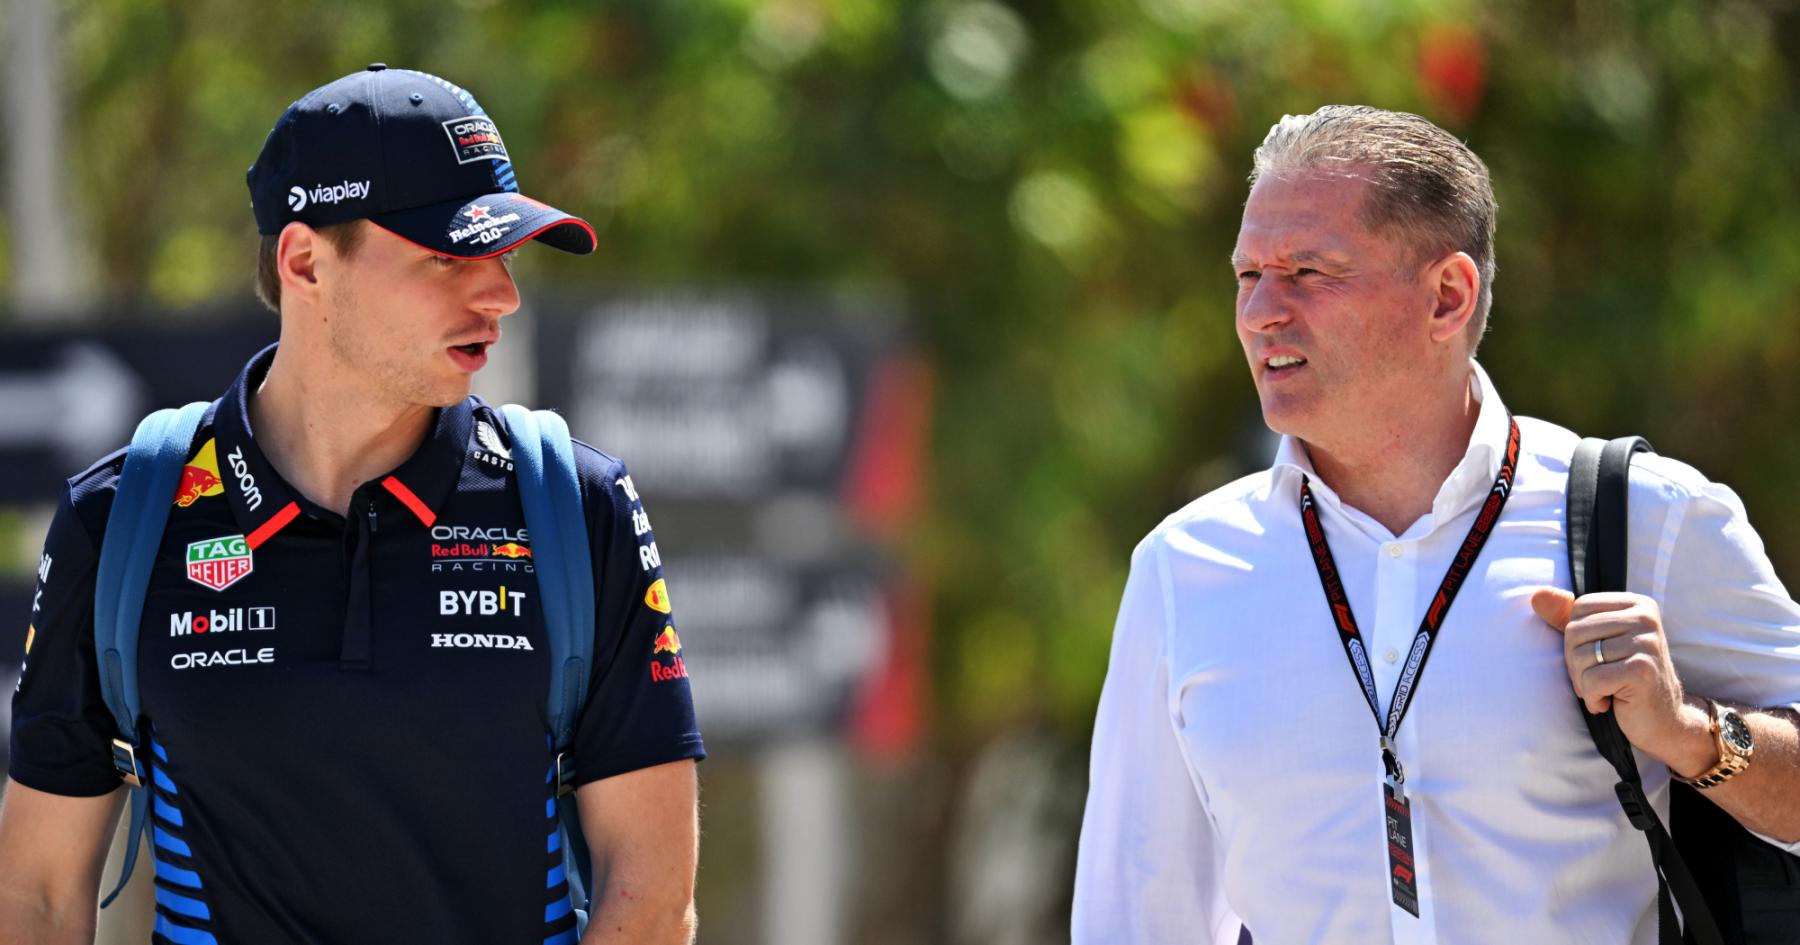 Unleashing the Power of Transparency: The Verstappen Family's Secret to Success